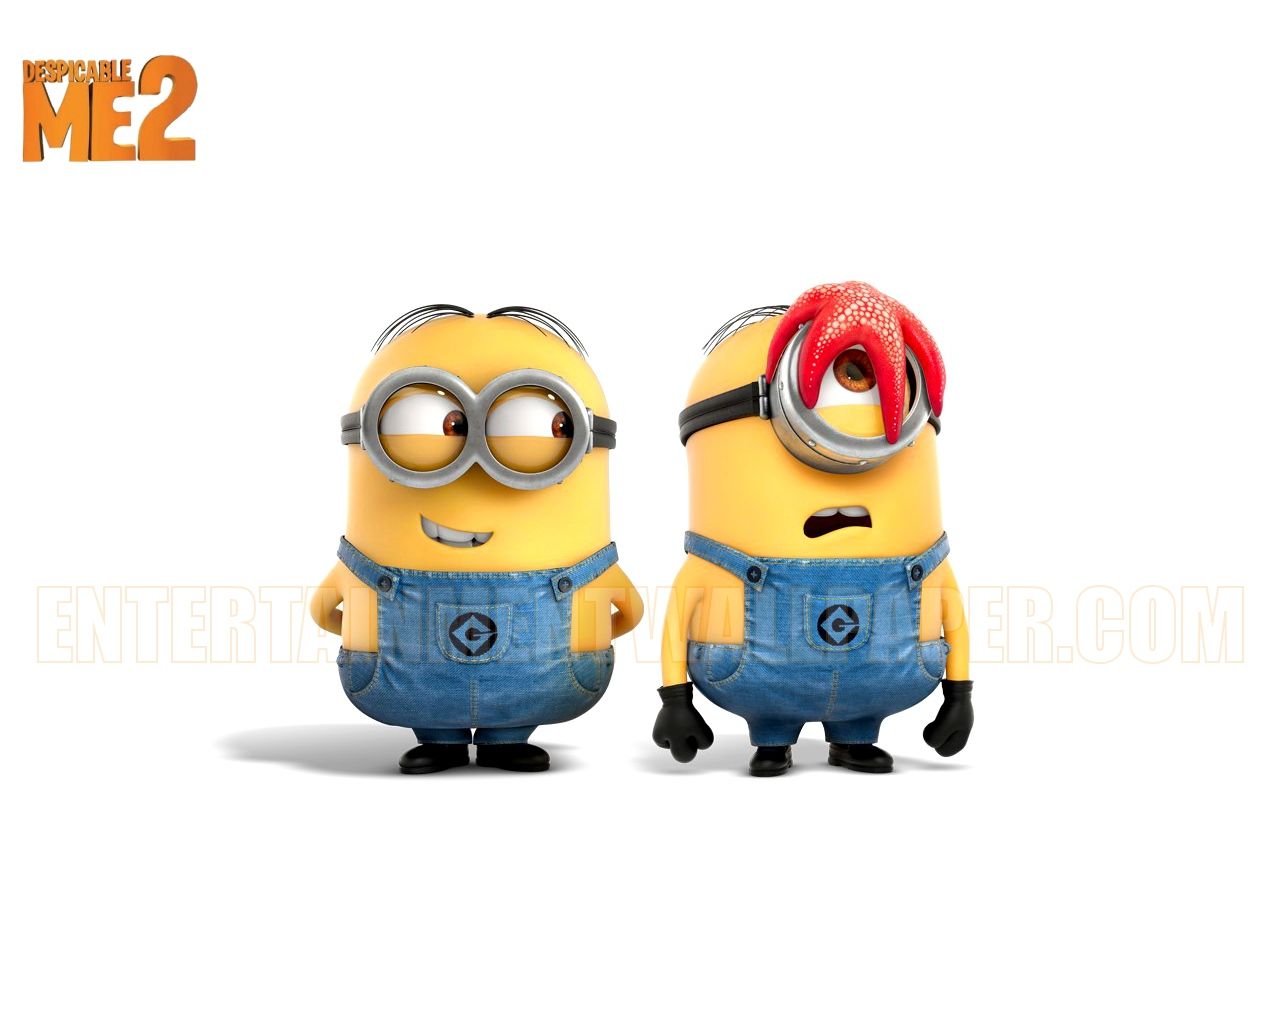 Minions - Despicable Me 2 Top Images Wallpaper 2931 Hd Wallpapers